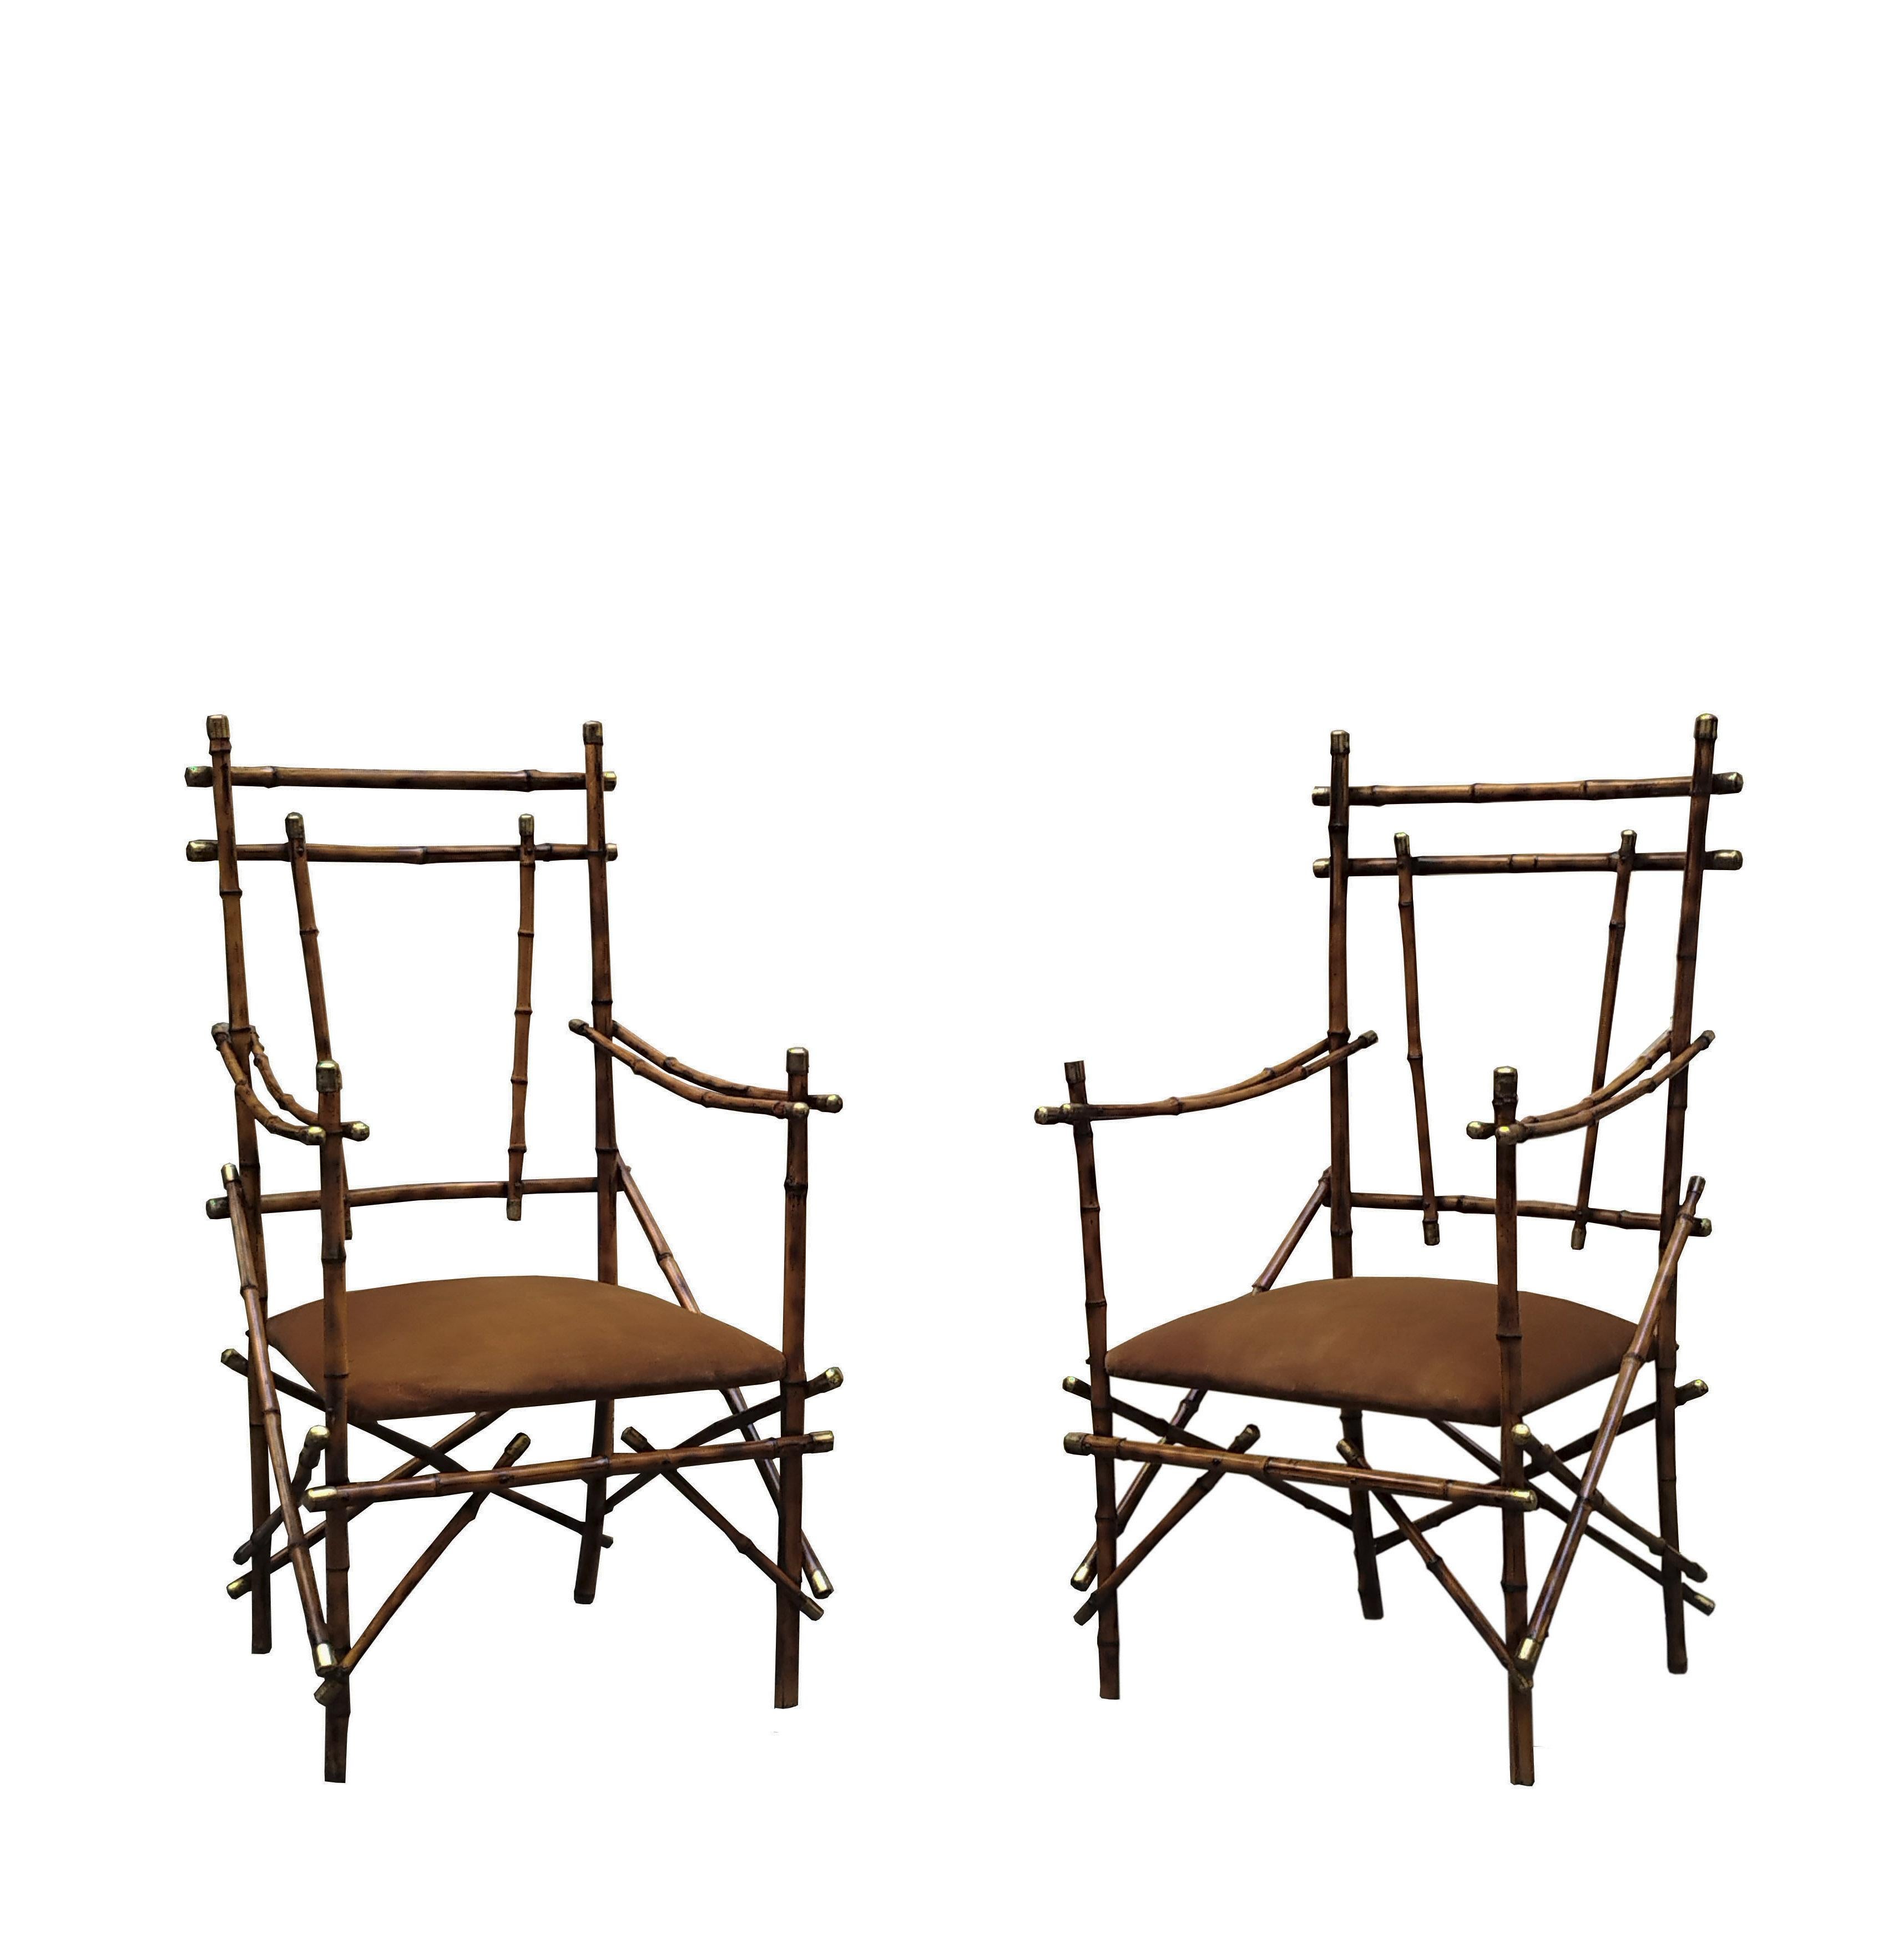 Rare Pair of armchairs with bamboo and brass frame, seat with padding and upholstered in brown fabric, and small support table with bamboo and brass frame, designed by architect Giusto Puri Purini for Ditta Bottega Gadda, Italy 1970
TABLE CM. H.41X67